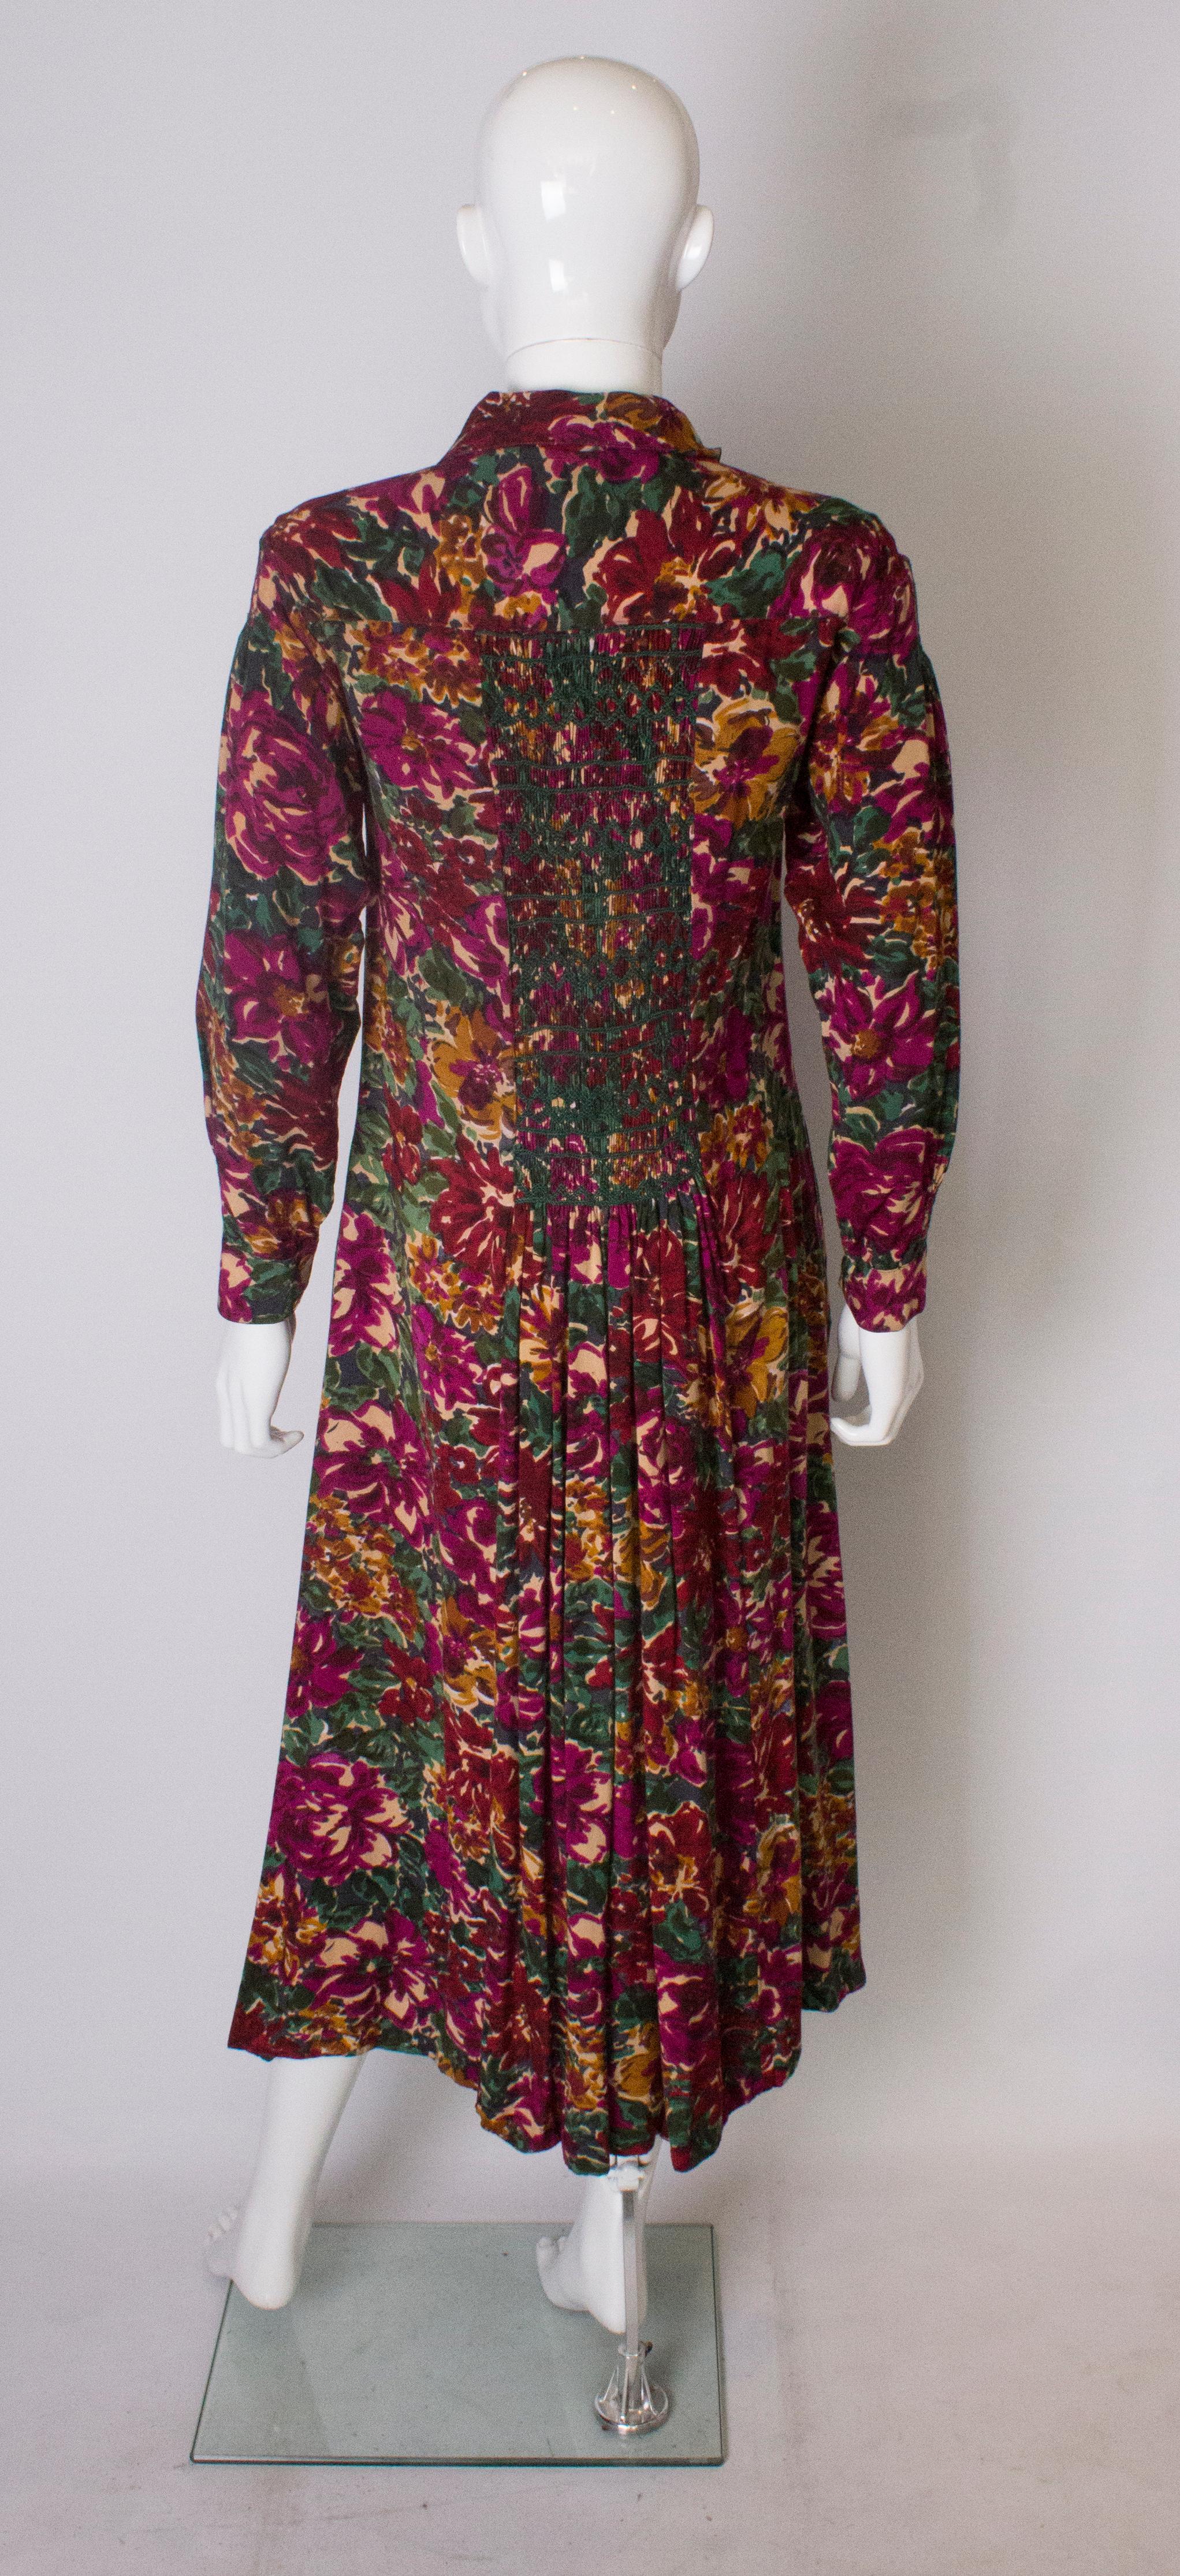 A vintage 1970s floral printed cotton day dress by Monsson 1